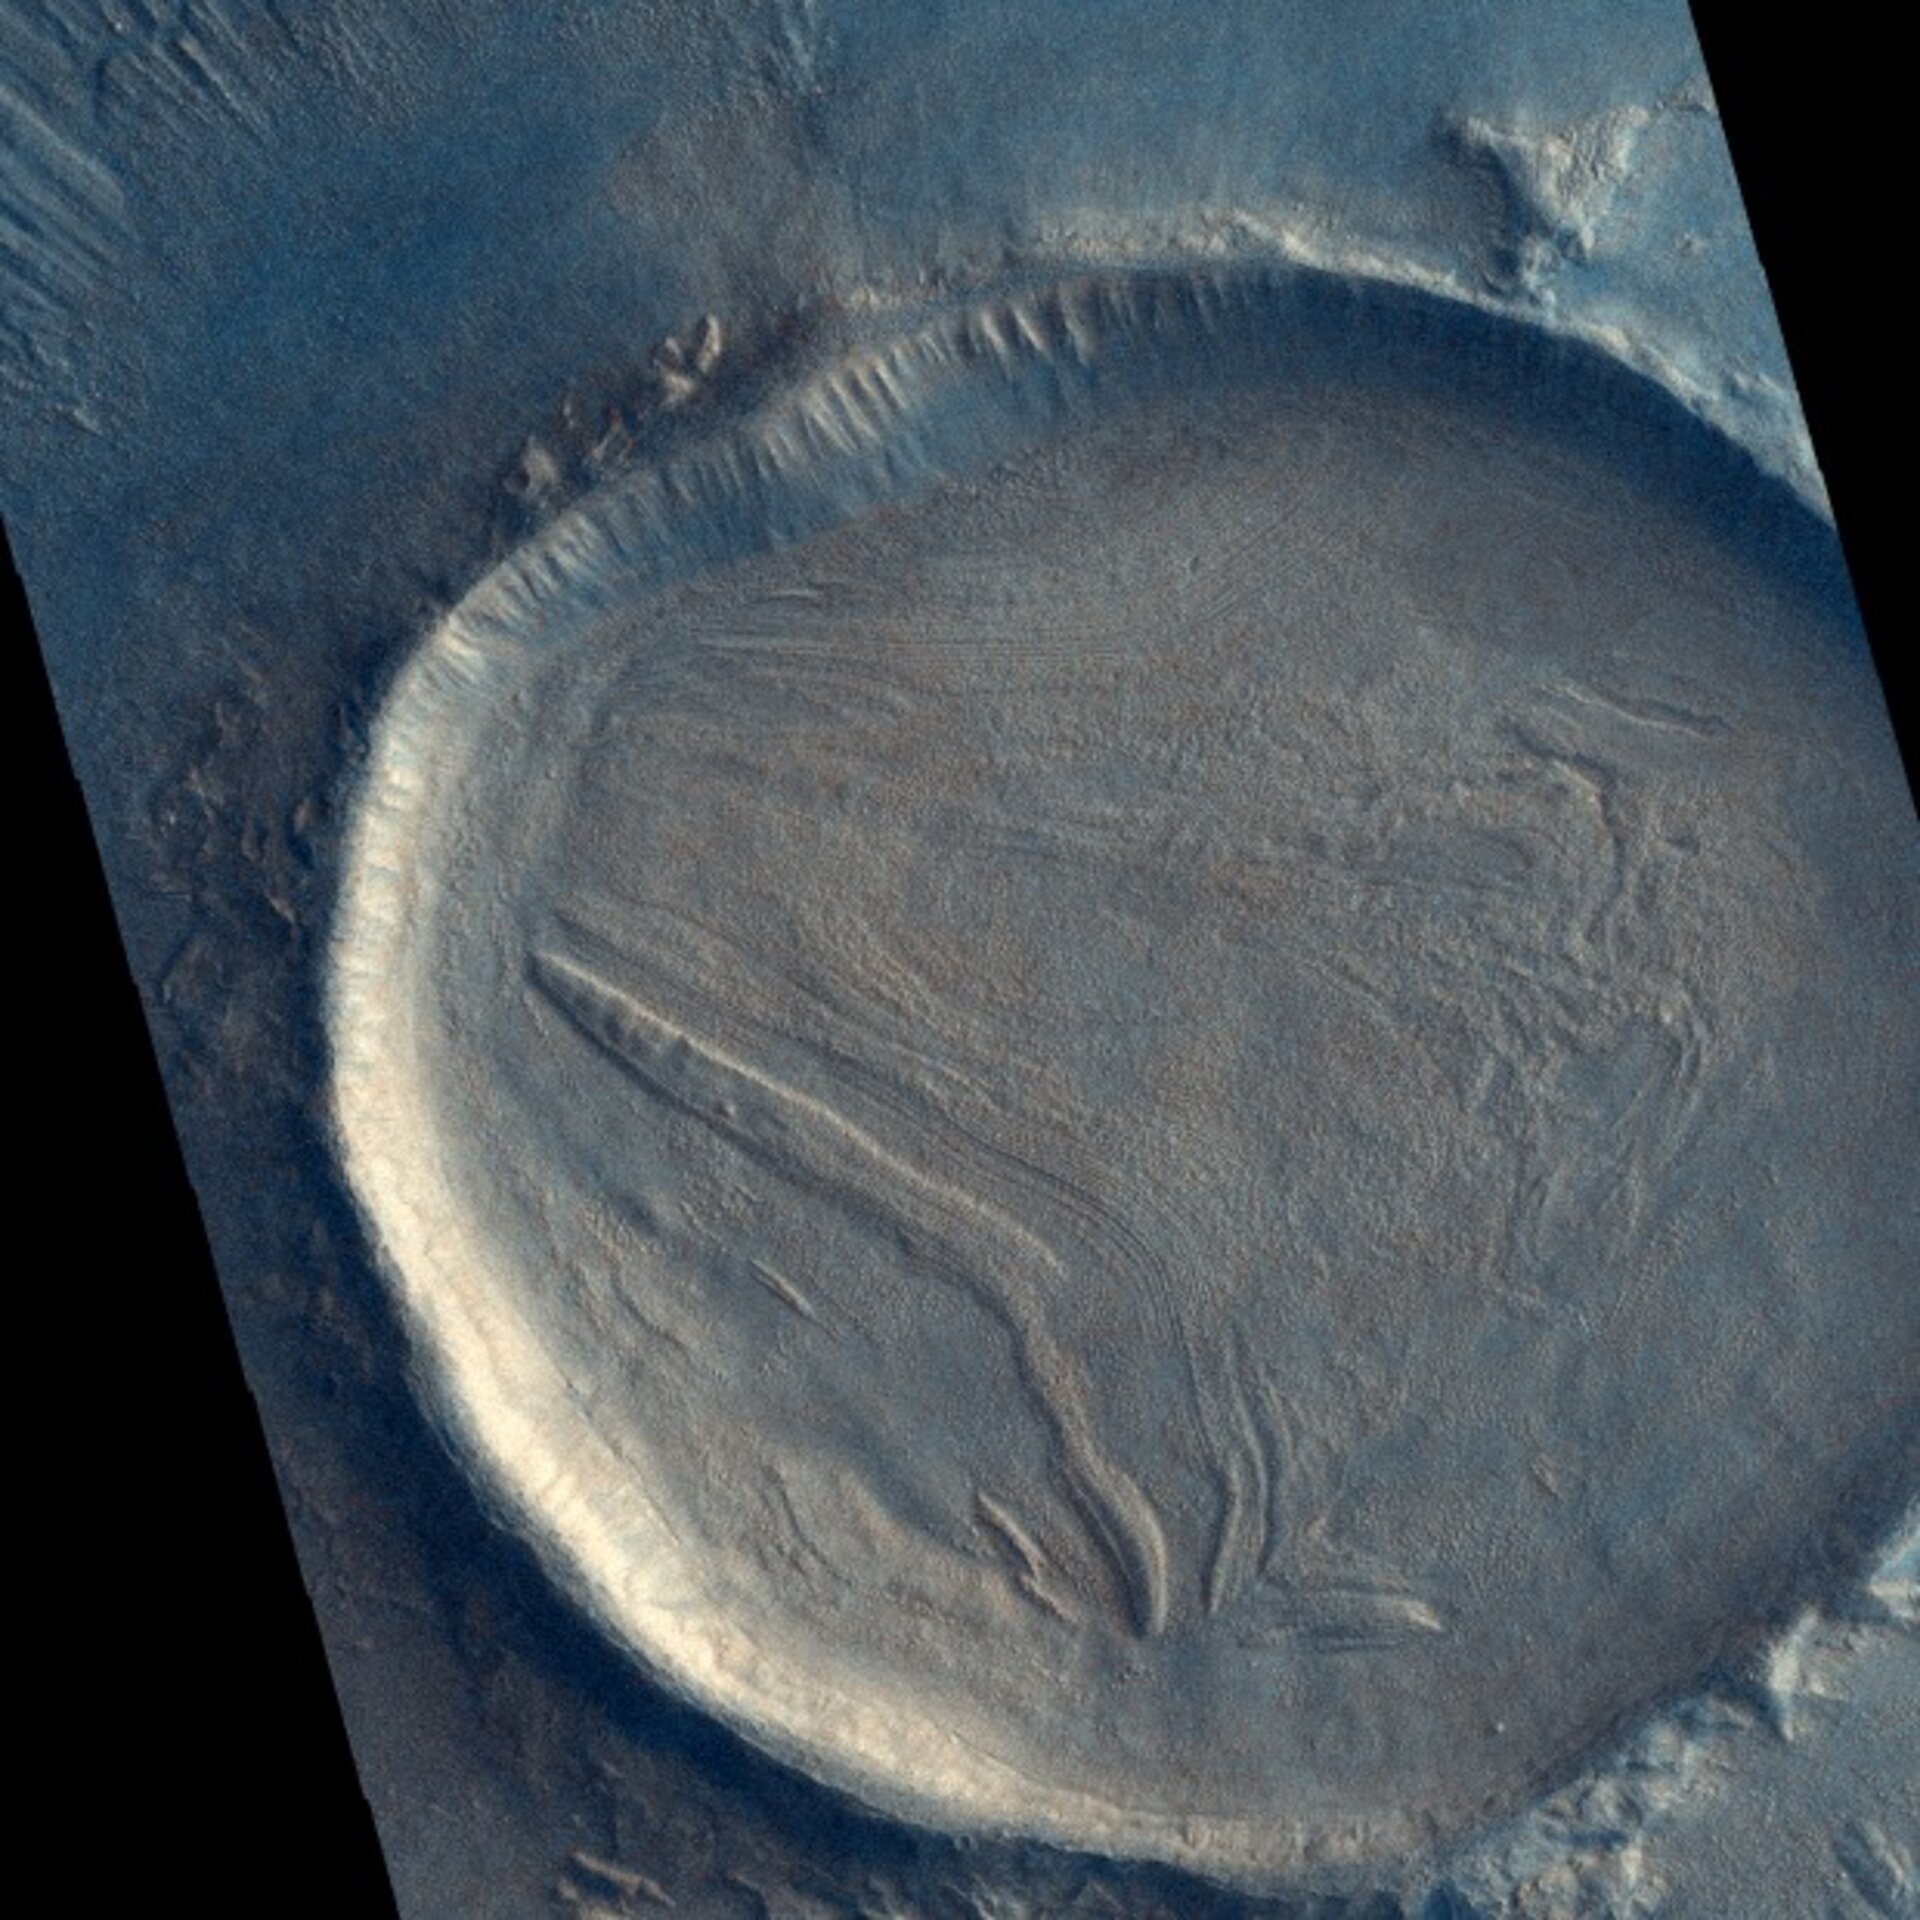 Crater fill